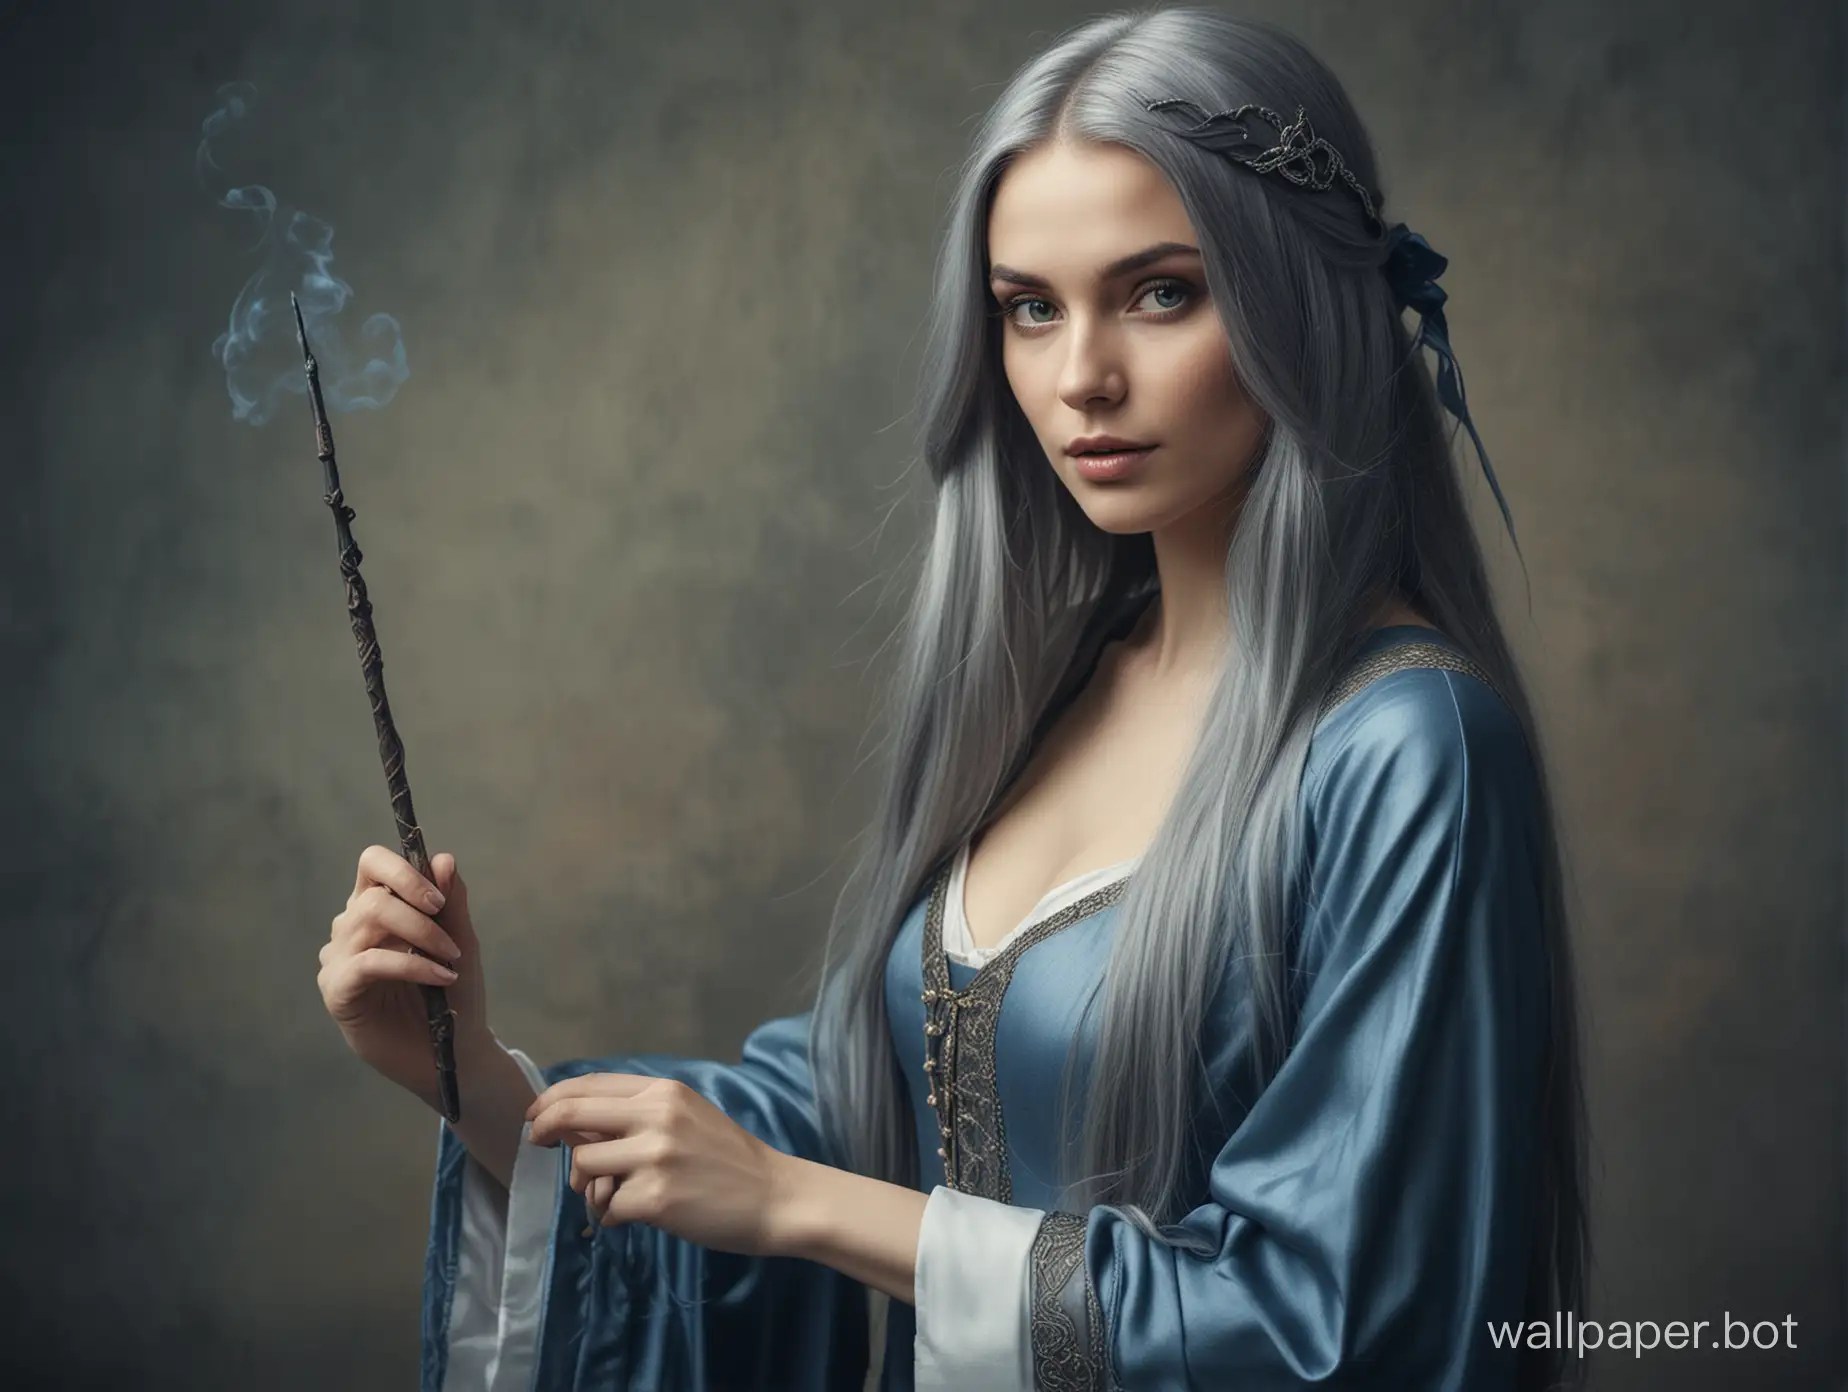 Medieval female magician, beautiful European woman, slender figure, blue-gray long hair, old robe, holding an ink wand, distant shot, muted tones, exquisite facial details, lifelike